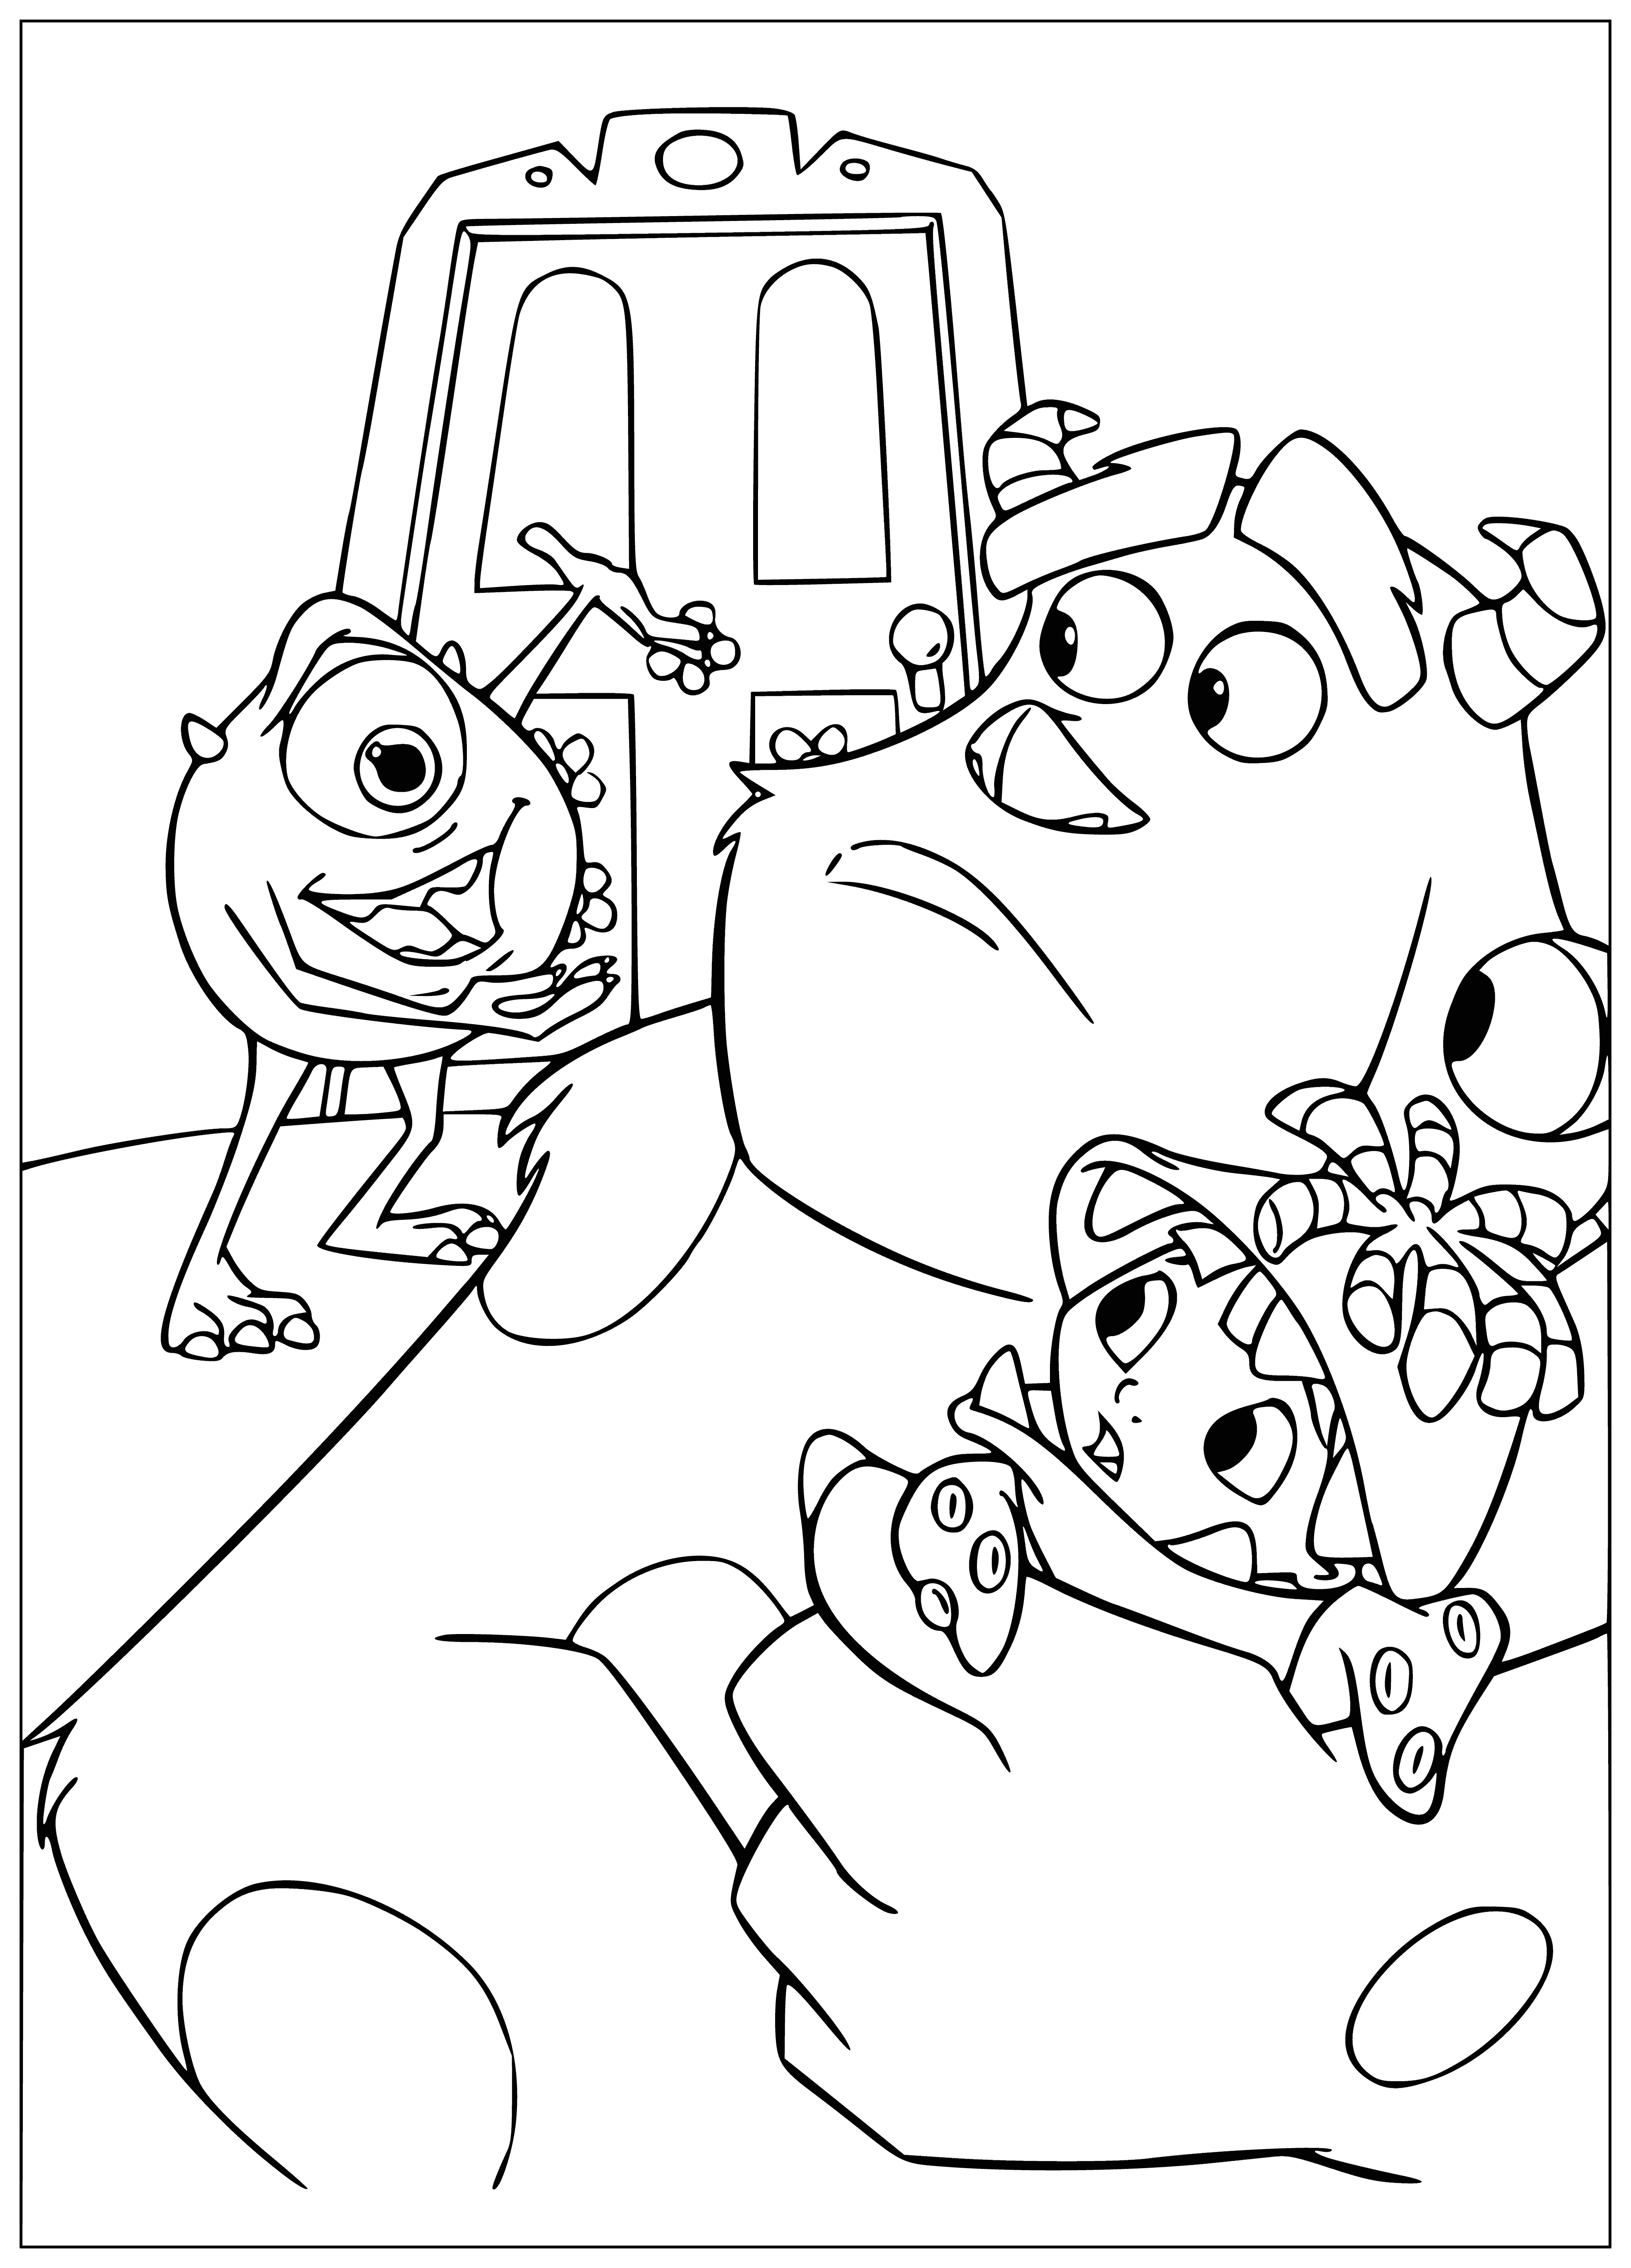 coloring page: Monster Inc. has a giant blue/purple door w/ an orange knocker & reads "Monster Inc."